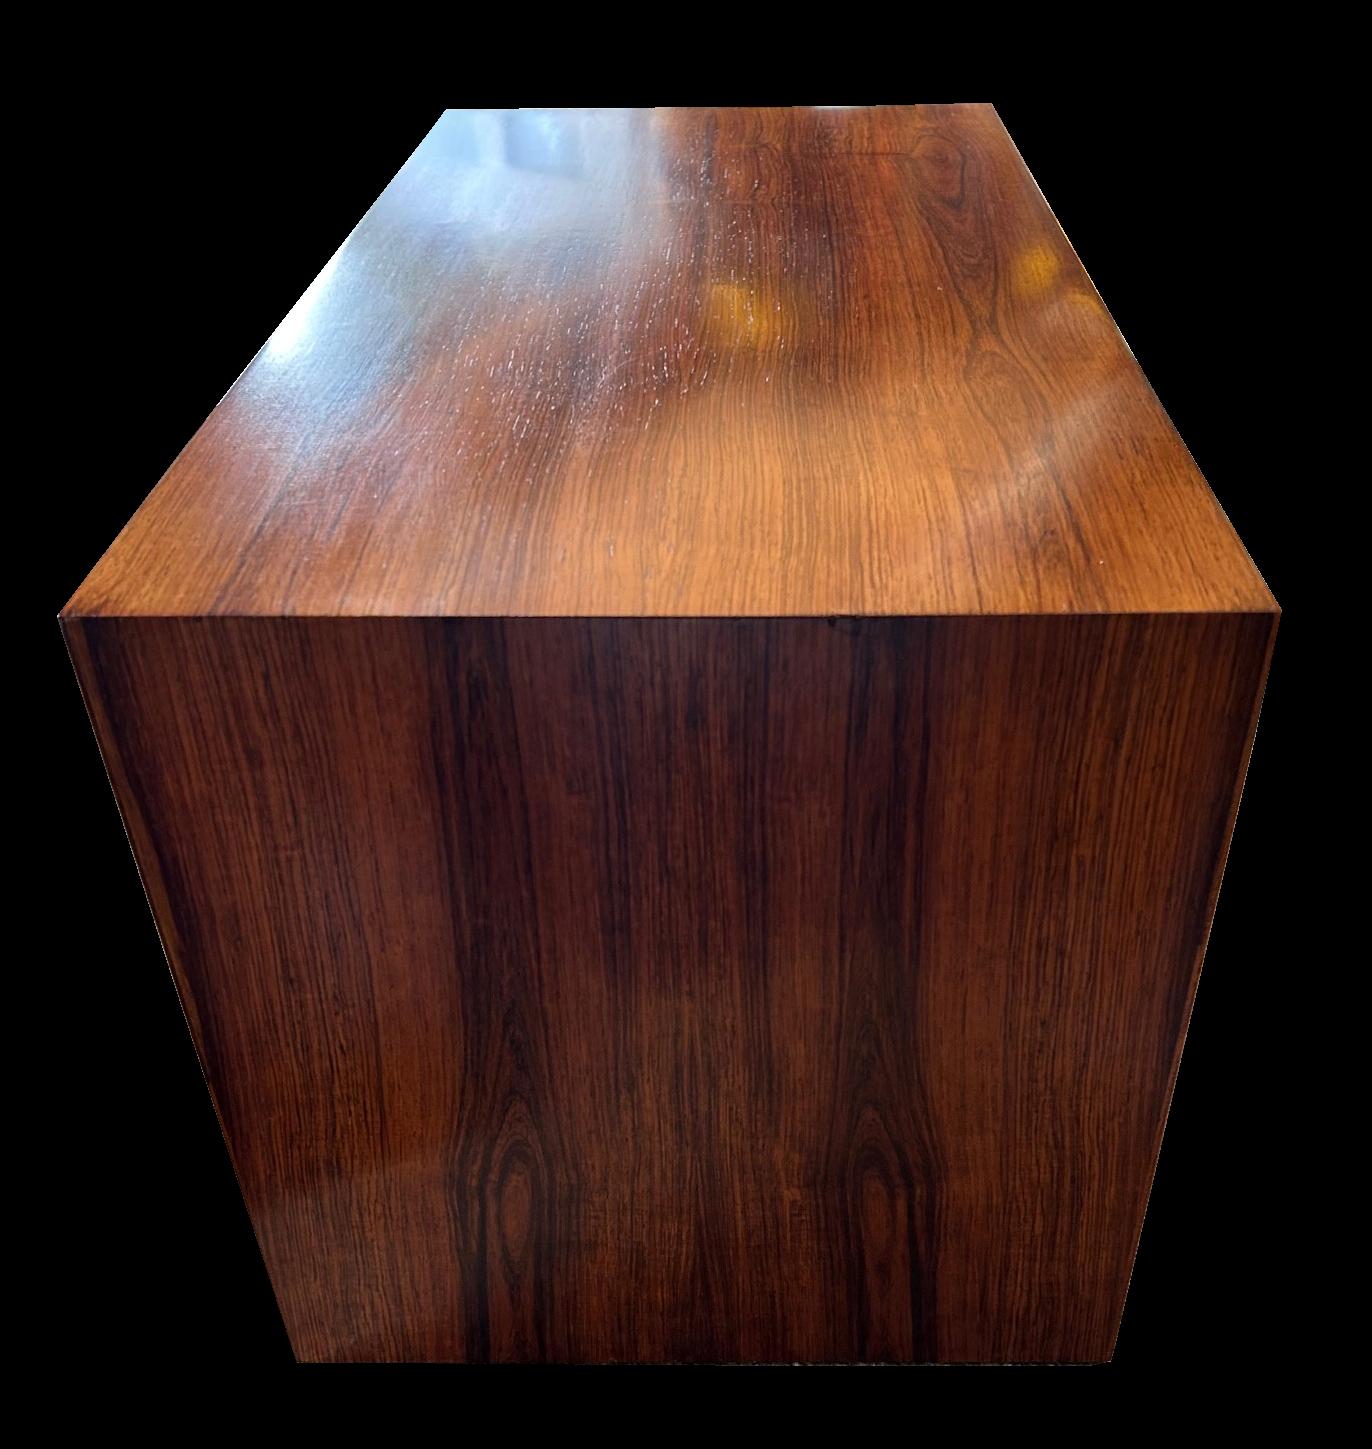 20th Century Santos Rosewood Record/Turntable cabinet by Torbjorn Afdal for Bruksbo